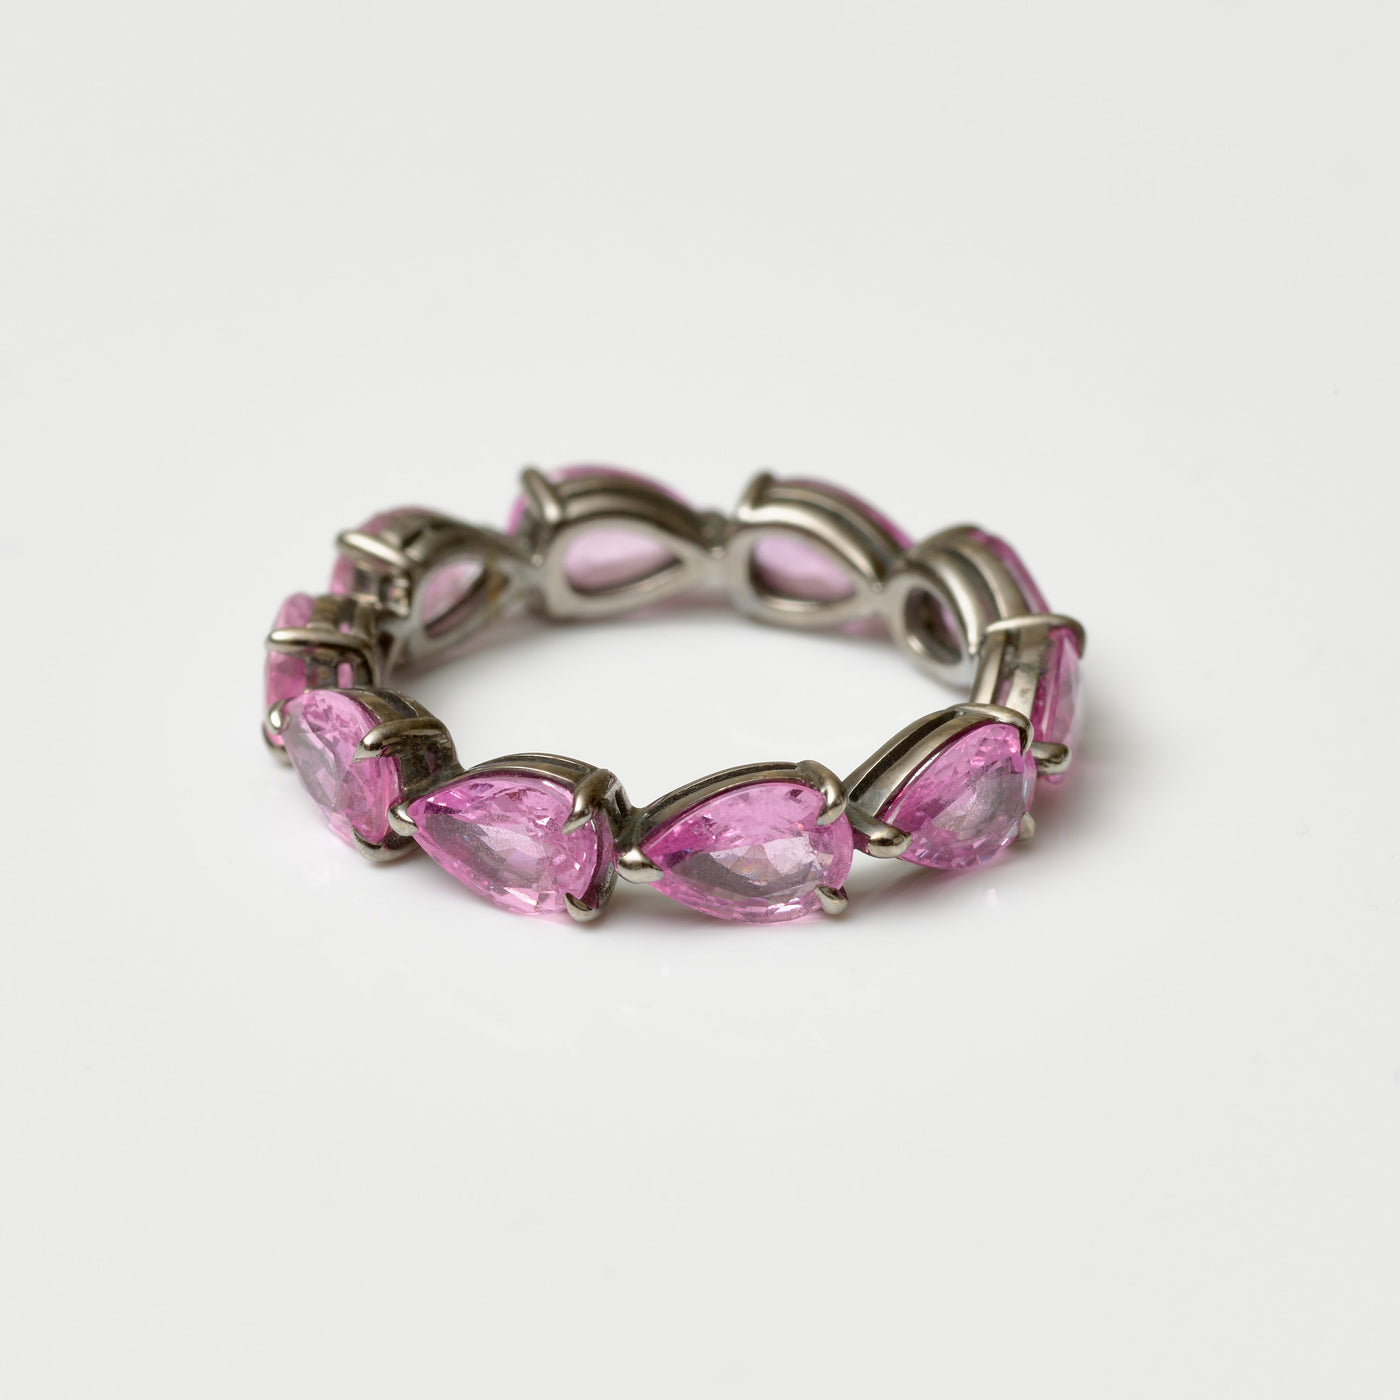 EAST-WEST PEAR-SHAPE Pink Sapphire ETERNITY BAND